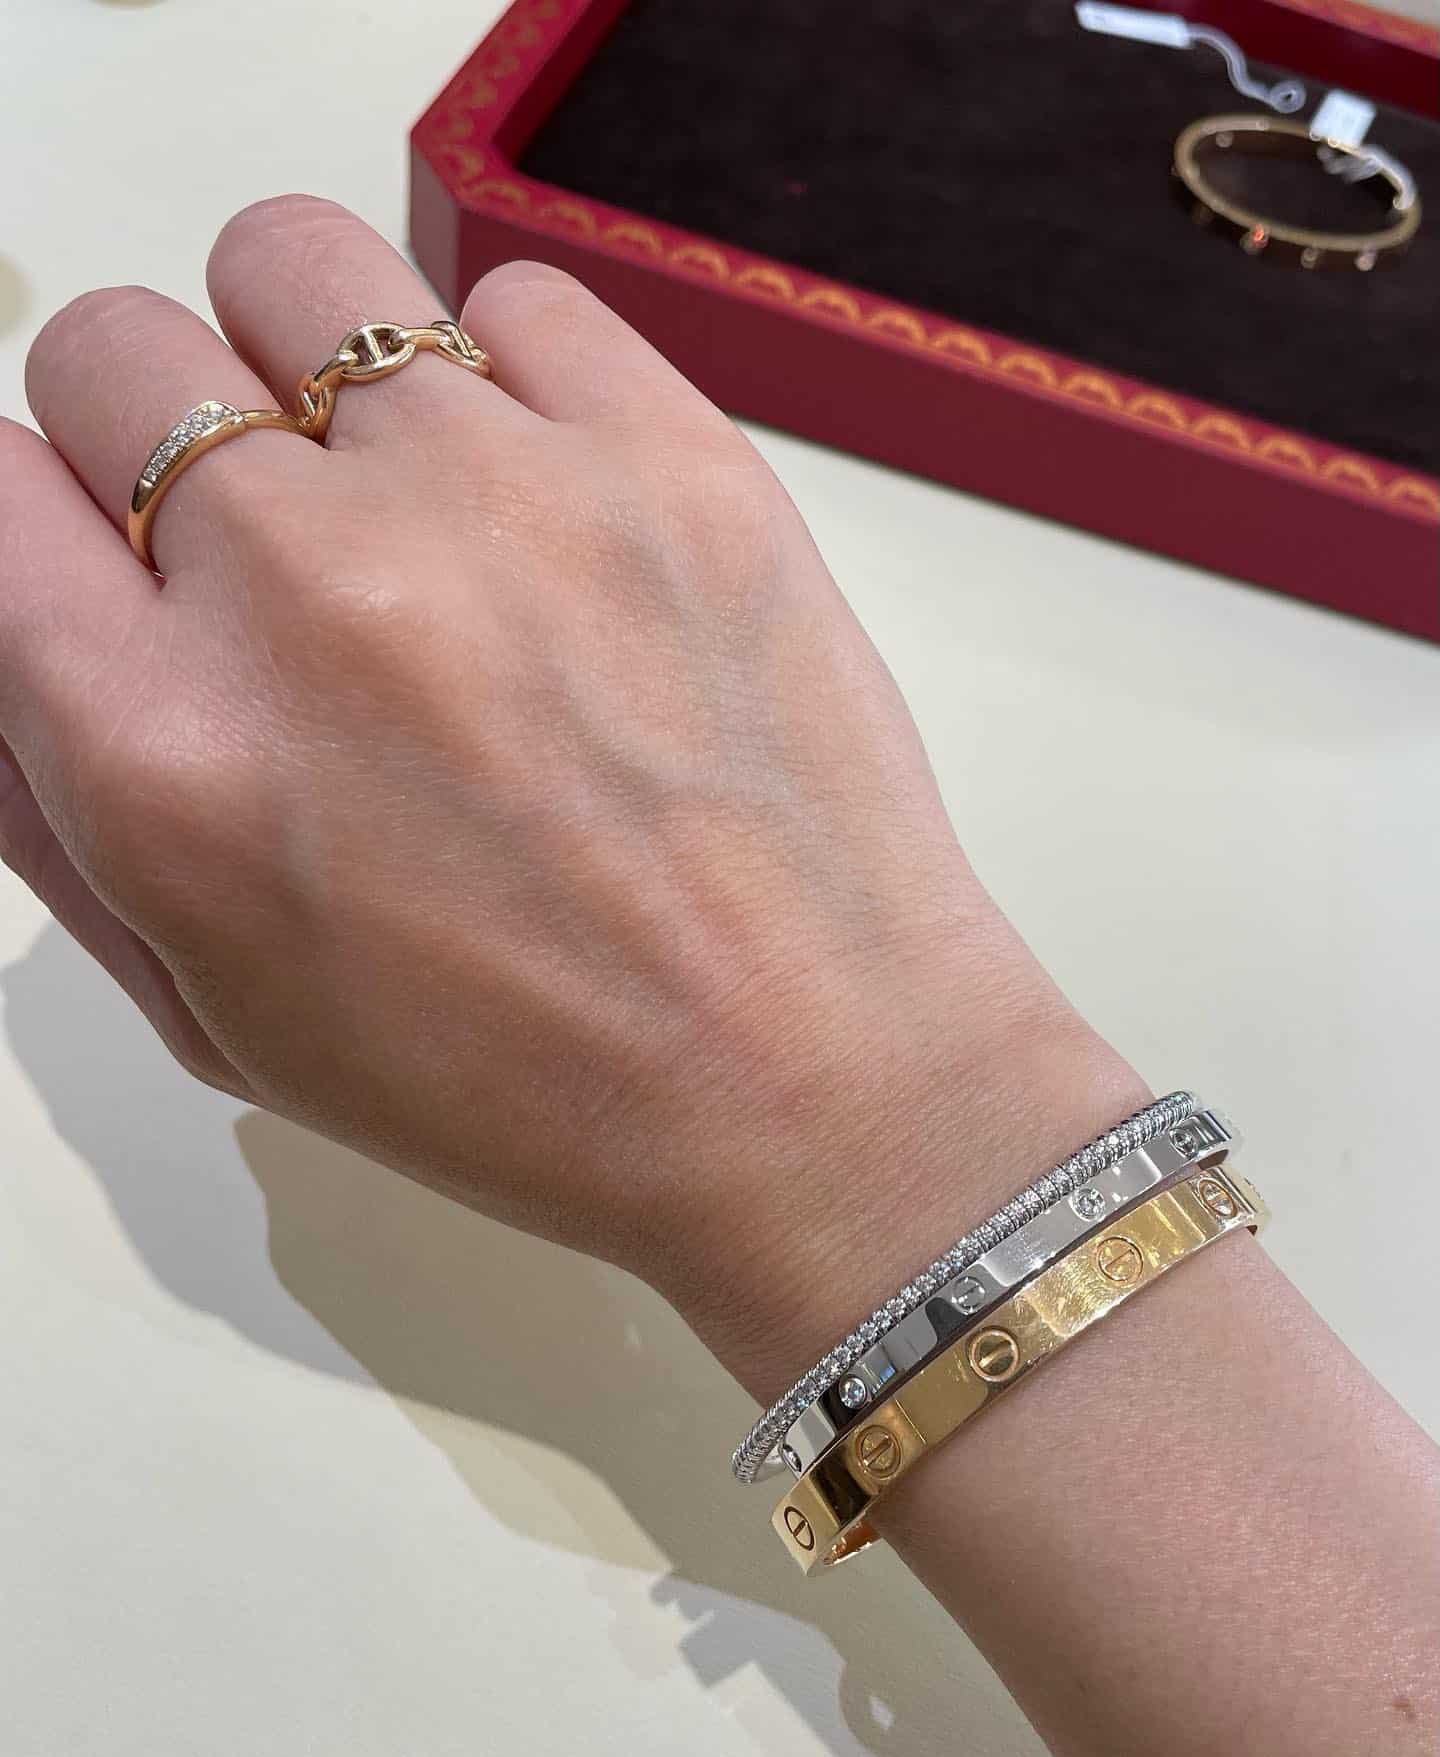 Is the Cartier love bracelet made with solid gold